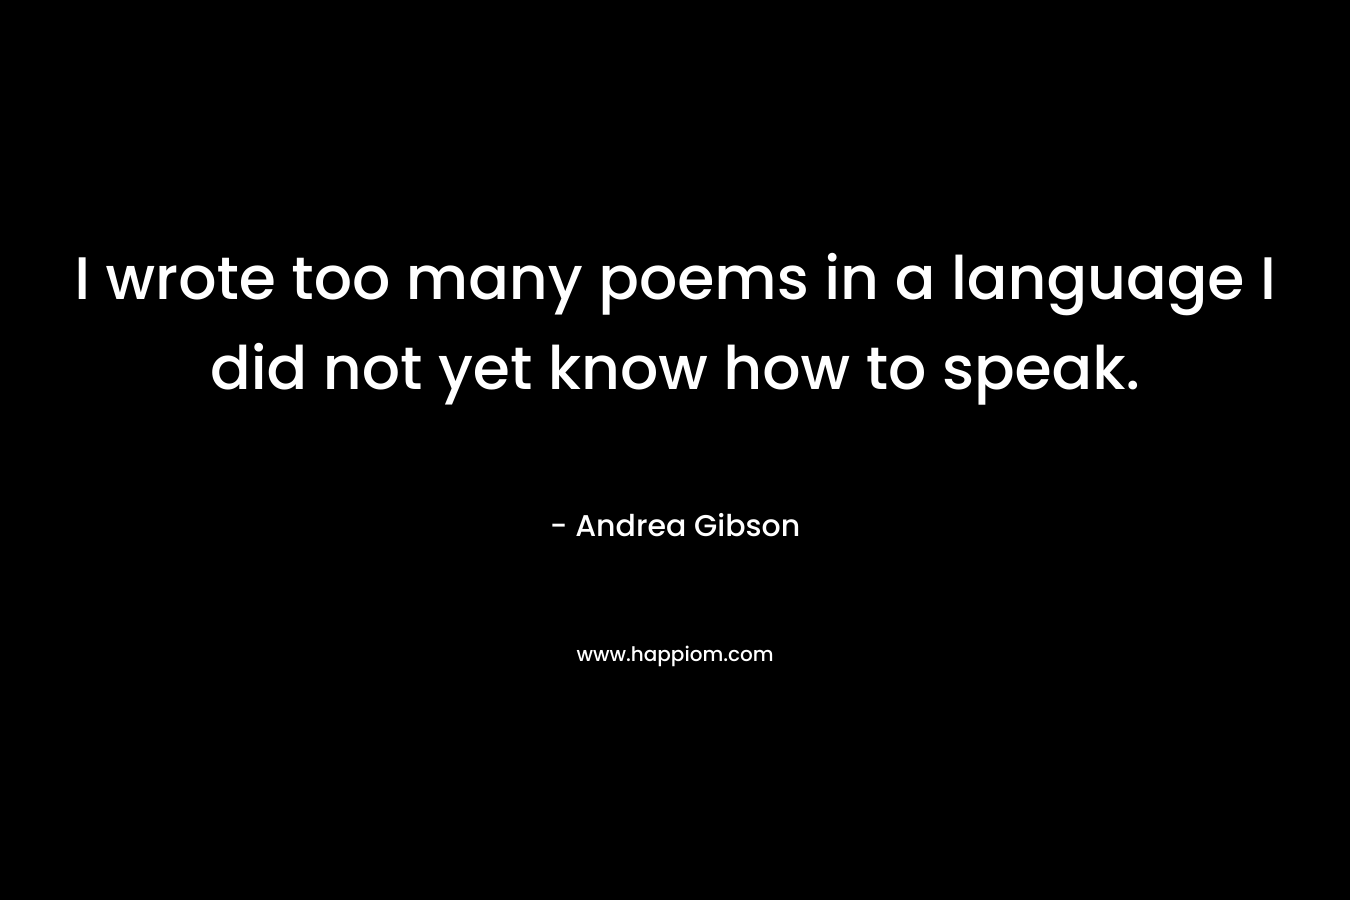 I wrote too many poems in a language I did not yet know how to speak.